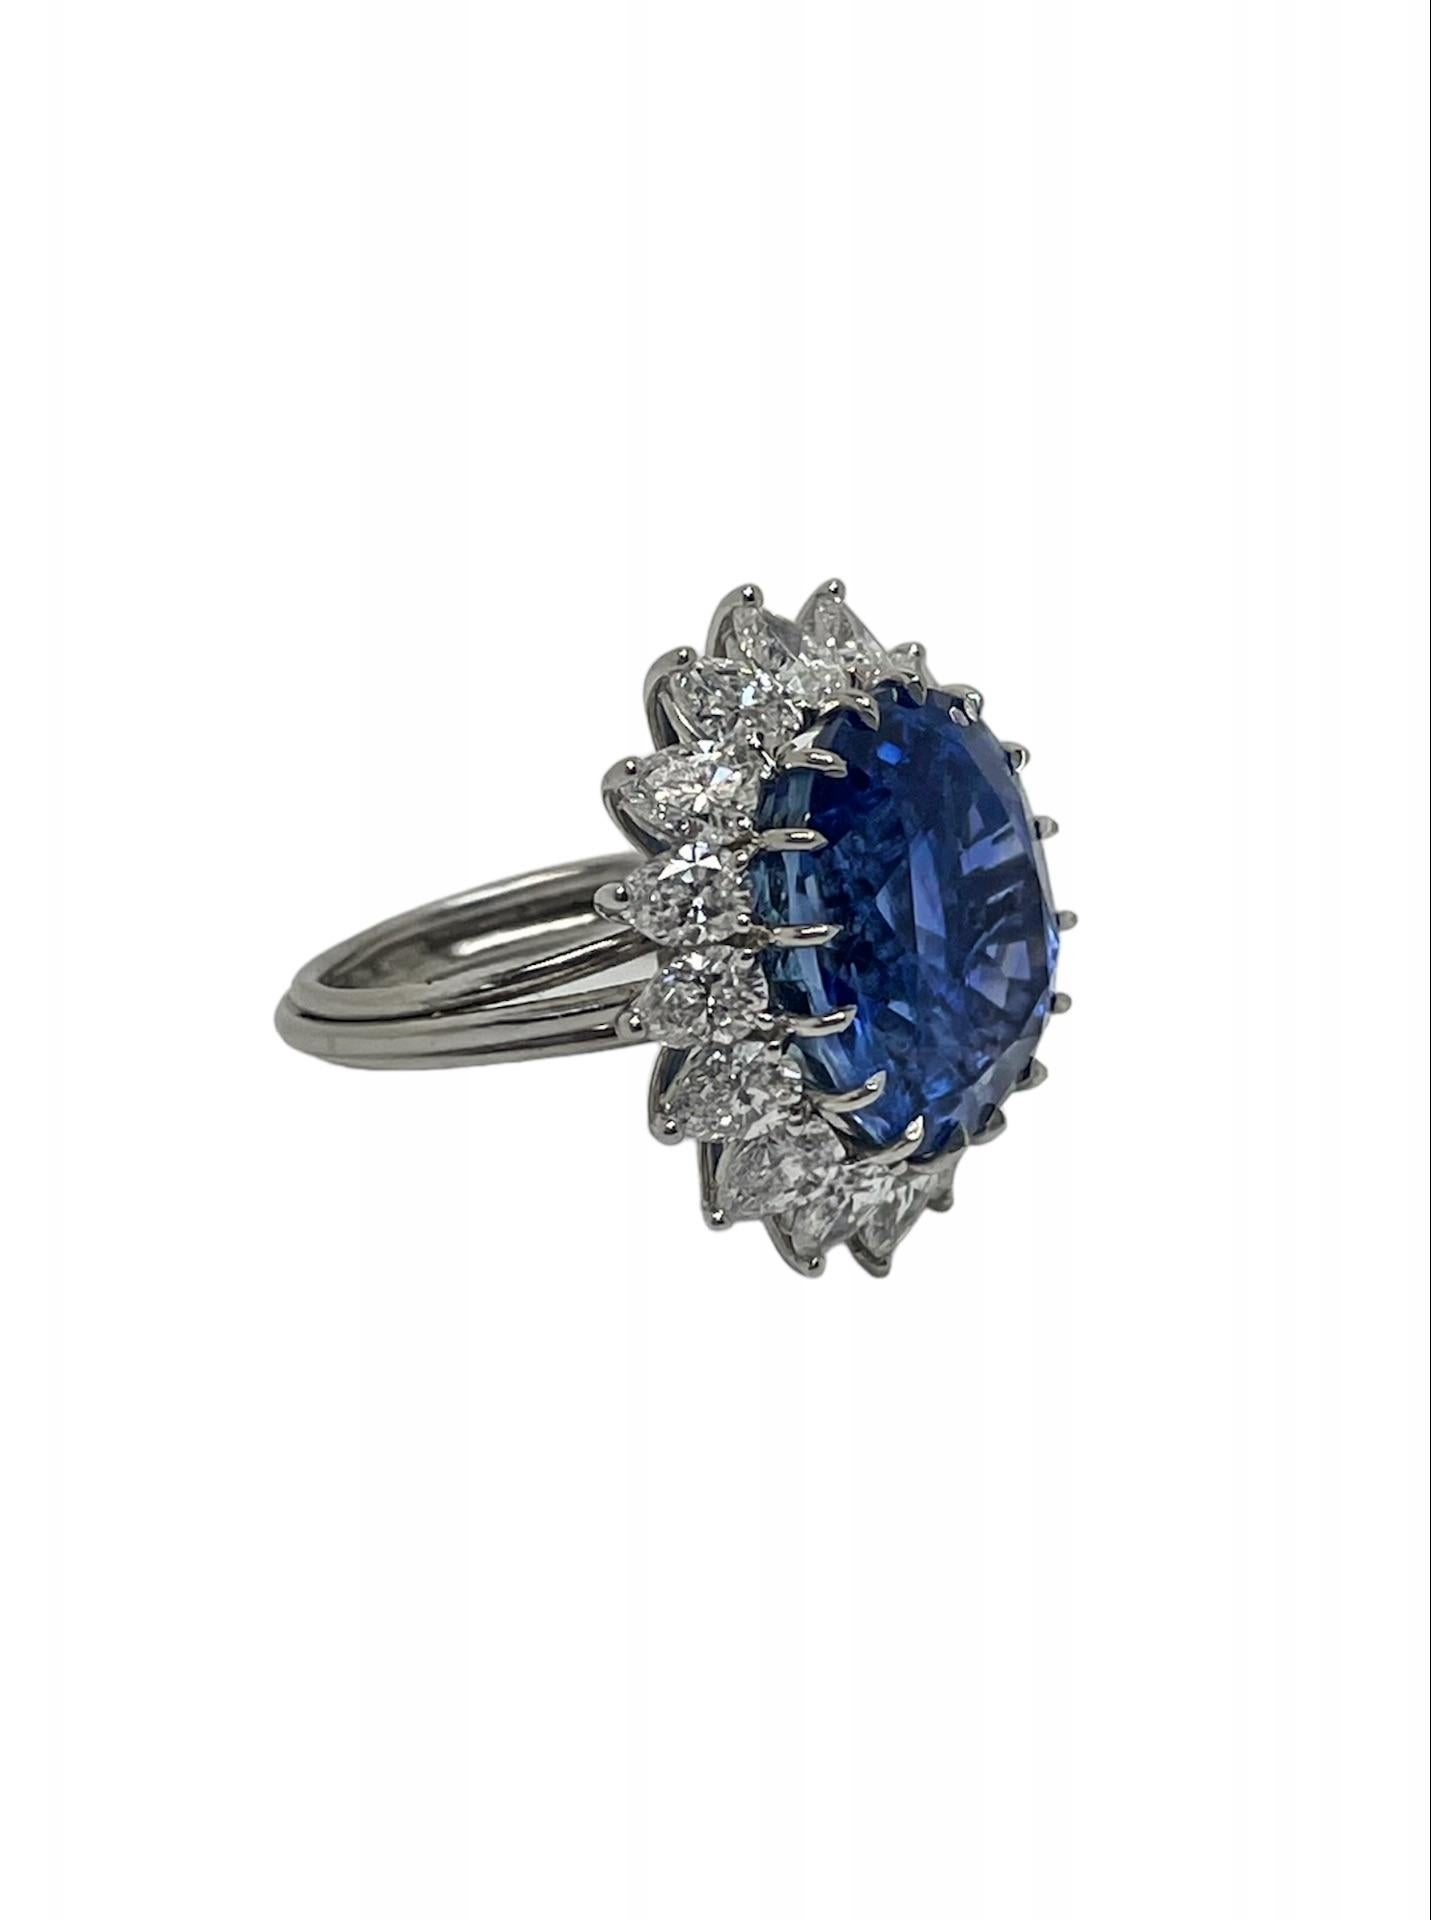 This showstopper cocktail ring features a bright and lively 20.36 carat Burma Unheated Sapphire with an amazing cornflower blue color, surrounded by an array of top quality pear shaped diamonds weighing approximately 4.55 carats total. With a